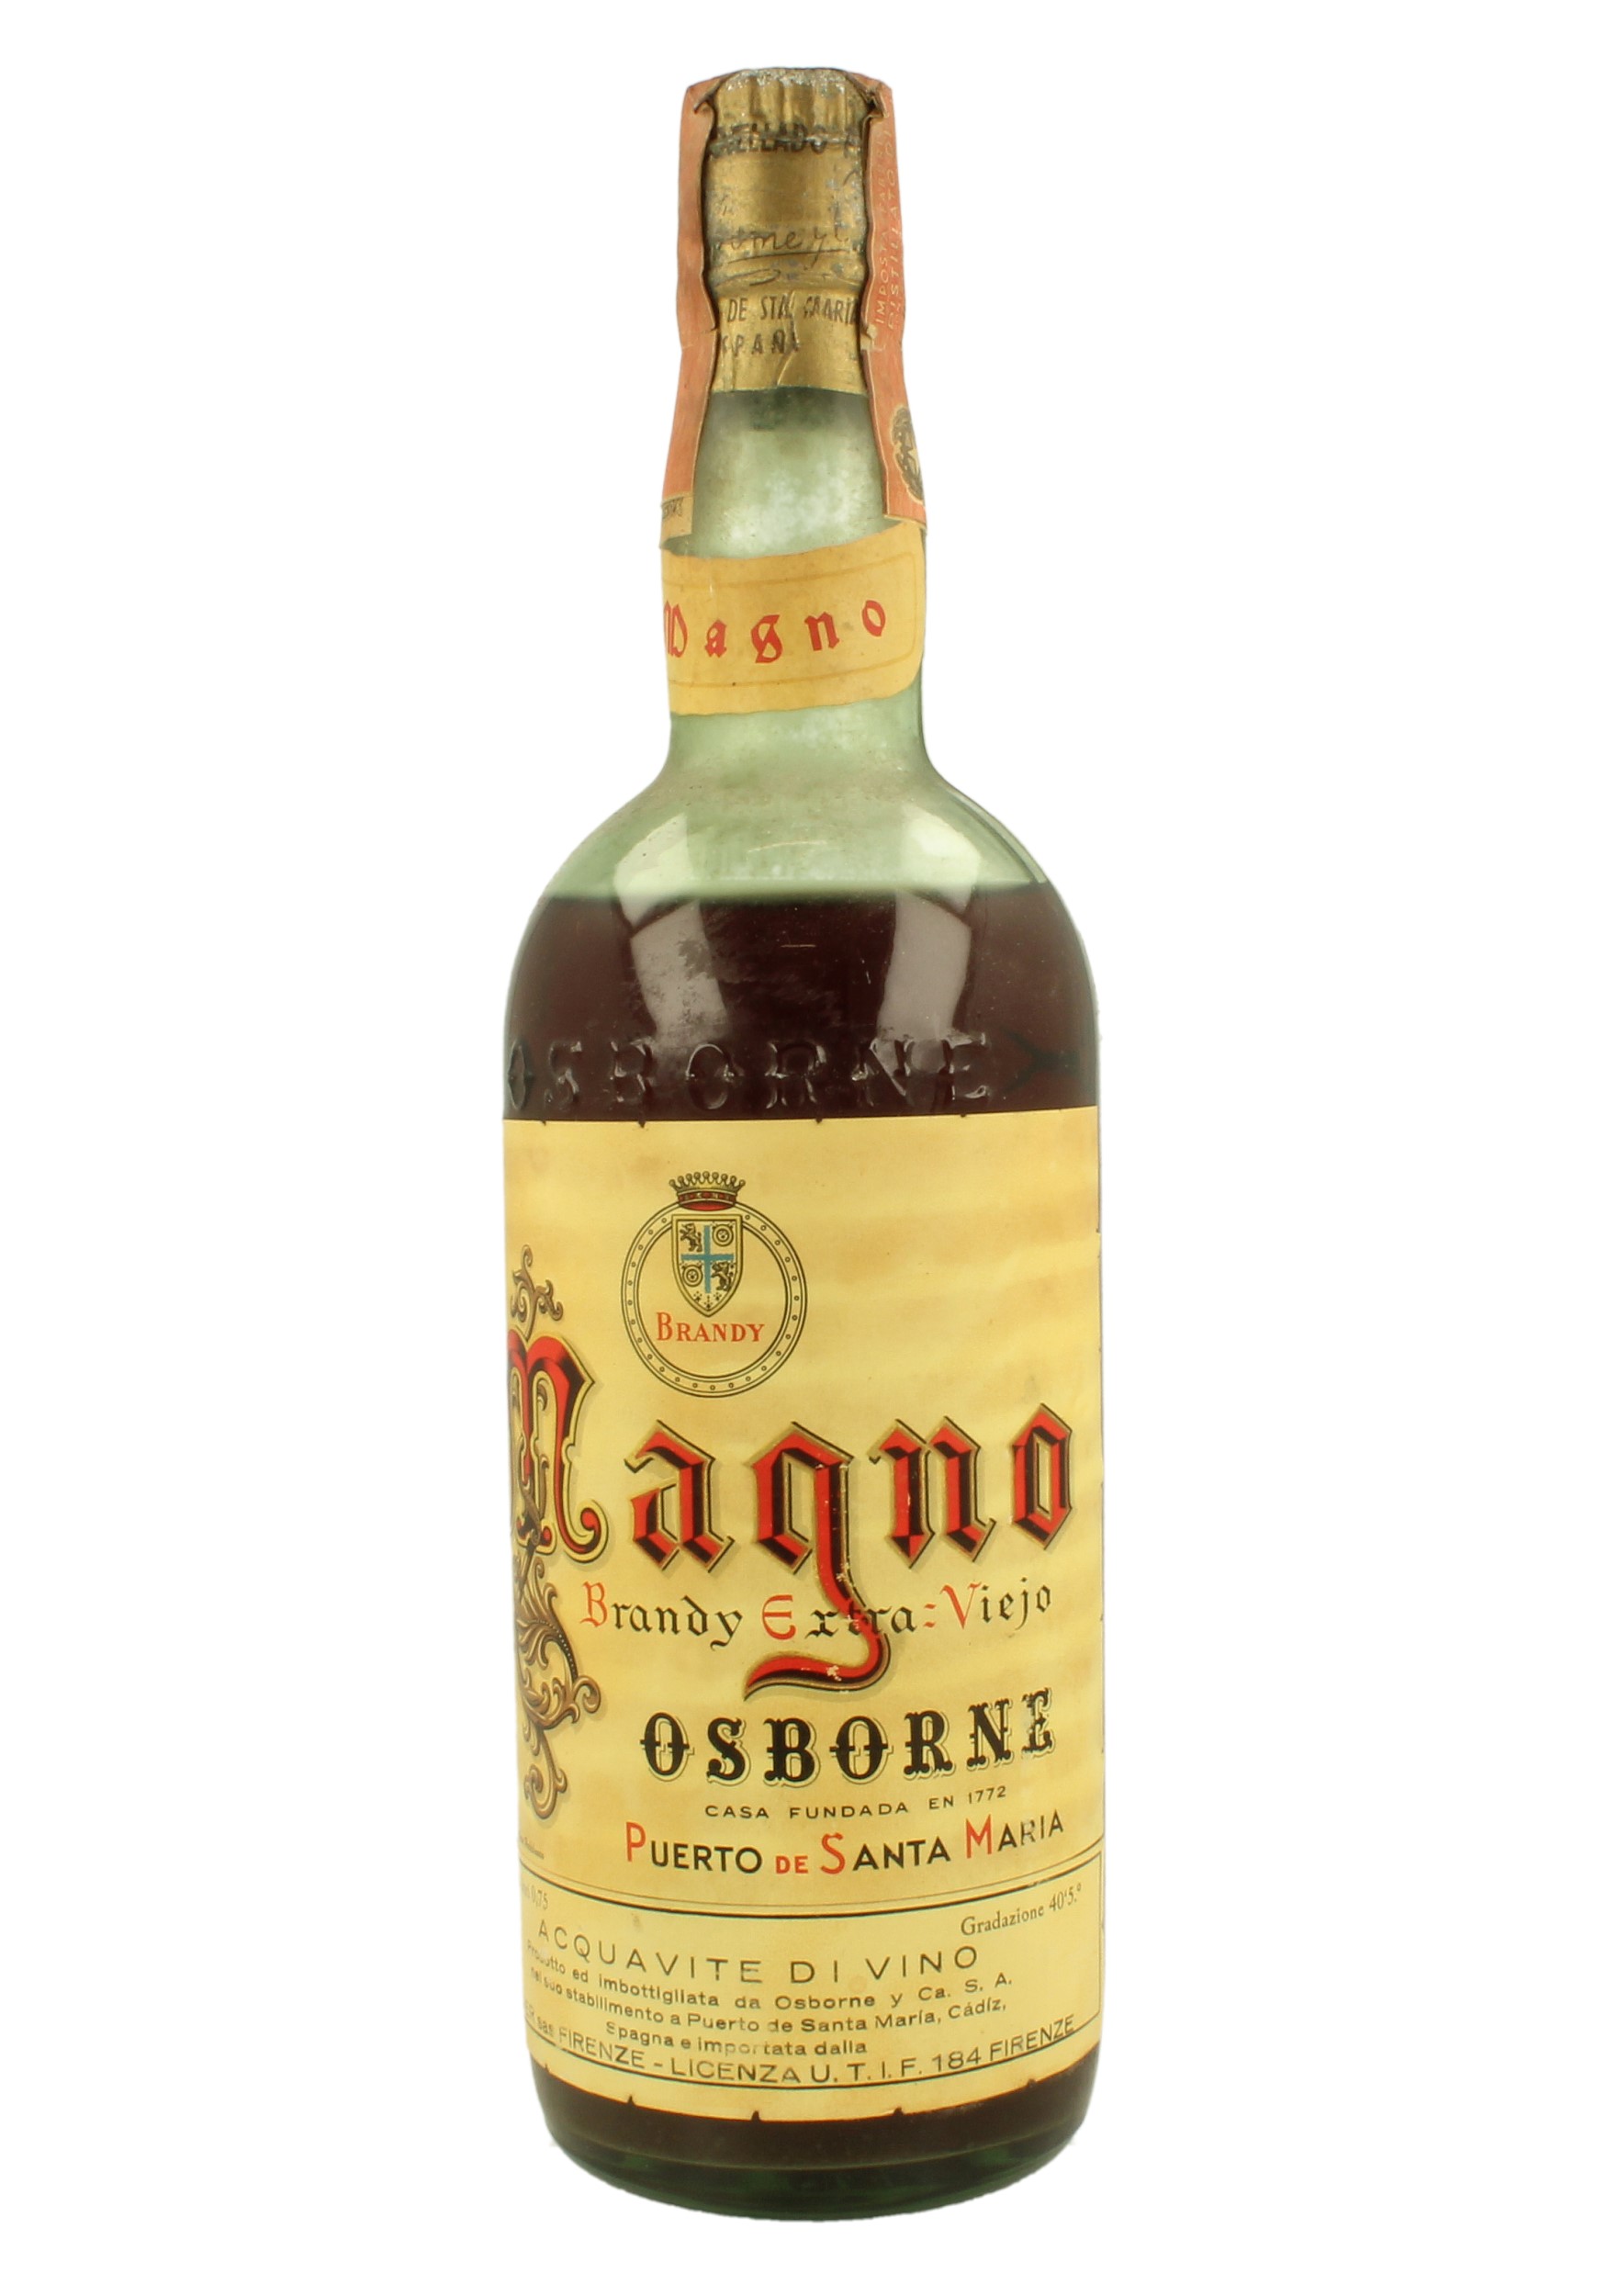 MAGNO OSBORNE BRANDY 75CL 38% VERY OLD BOTTLE - Products - Whisky Antique,  Whisky & Spirits